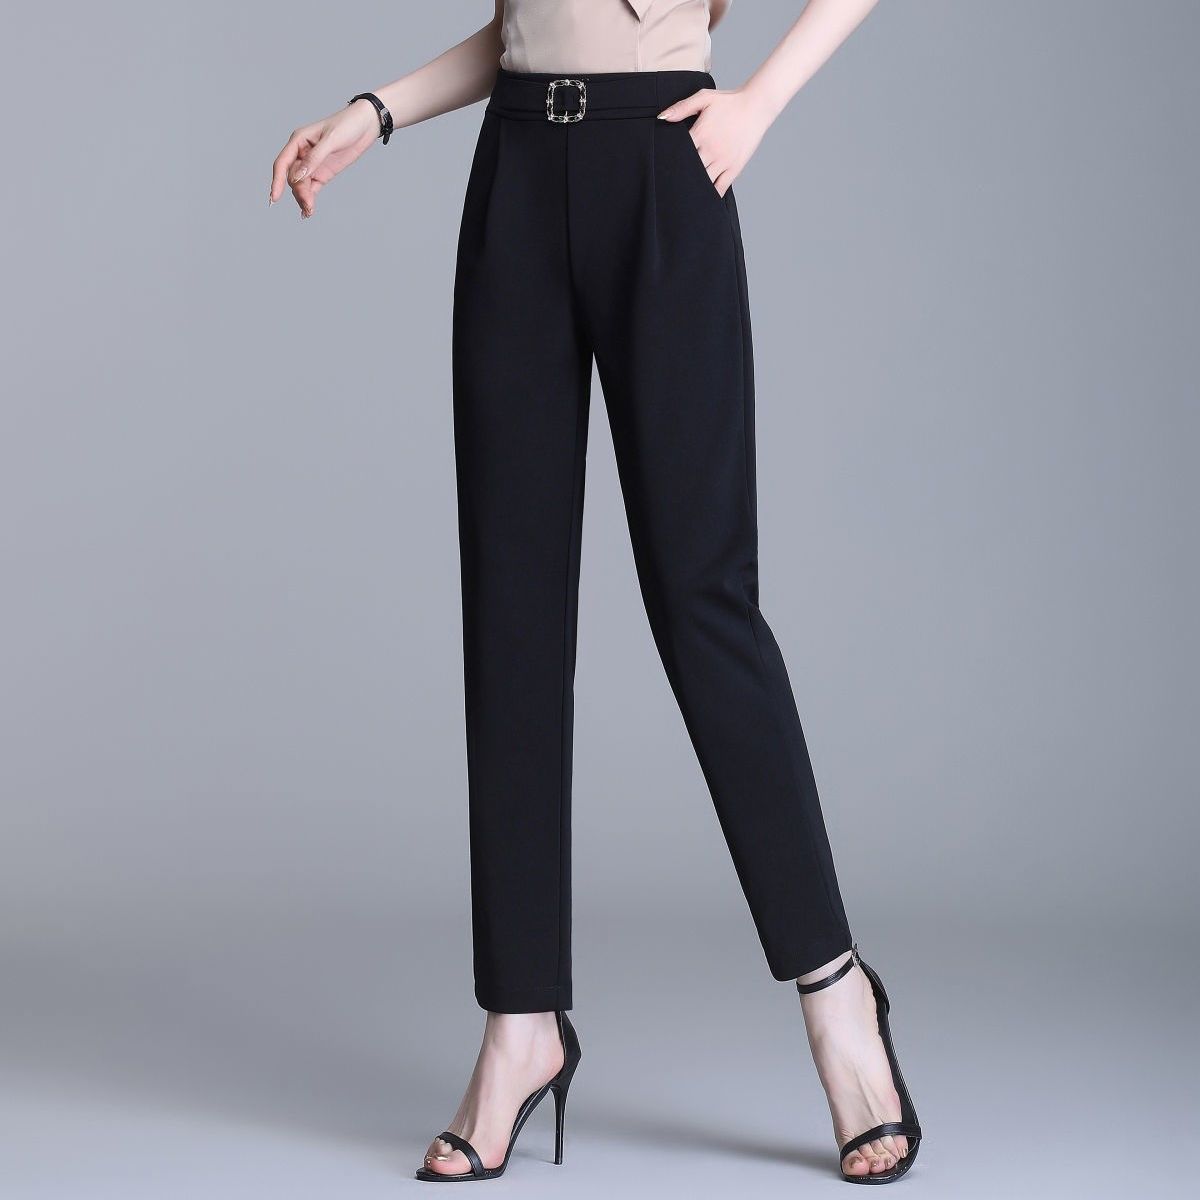 Nine points / trousers ice silk harem pants women's summer thin section high waist slim casual pants with a sense of drape and all-match skinny pants